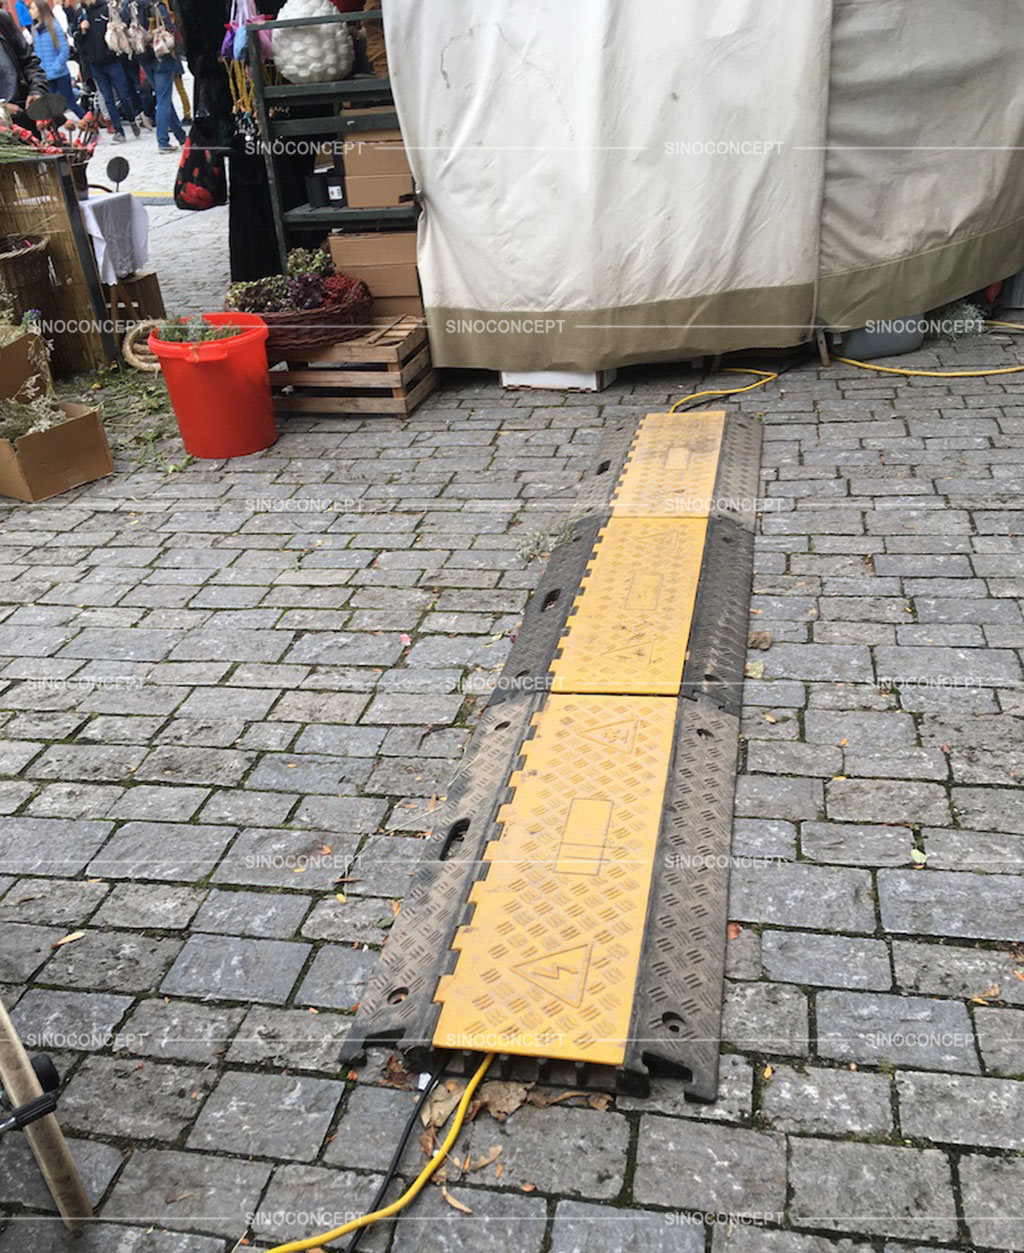 Used cable protectors with yellow covers to protect cables on the street